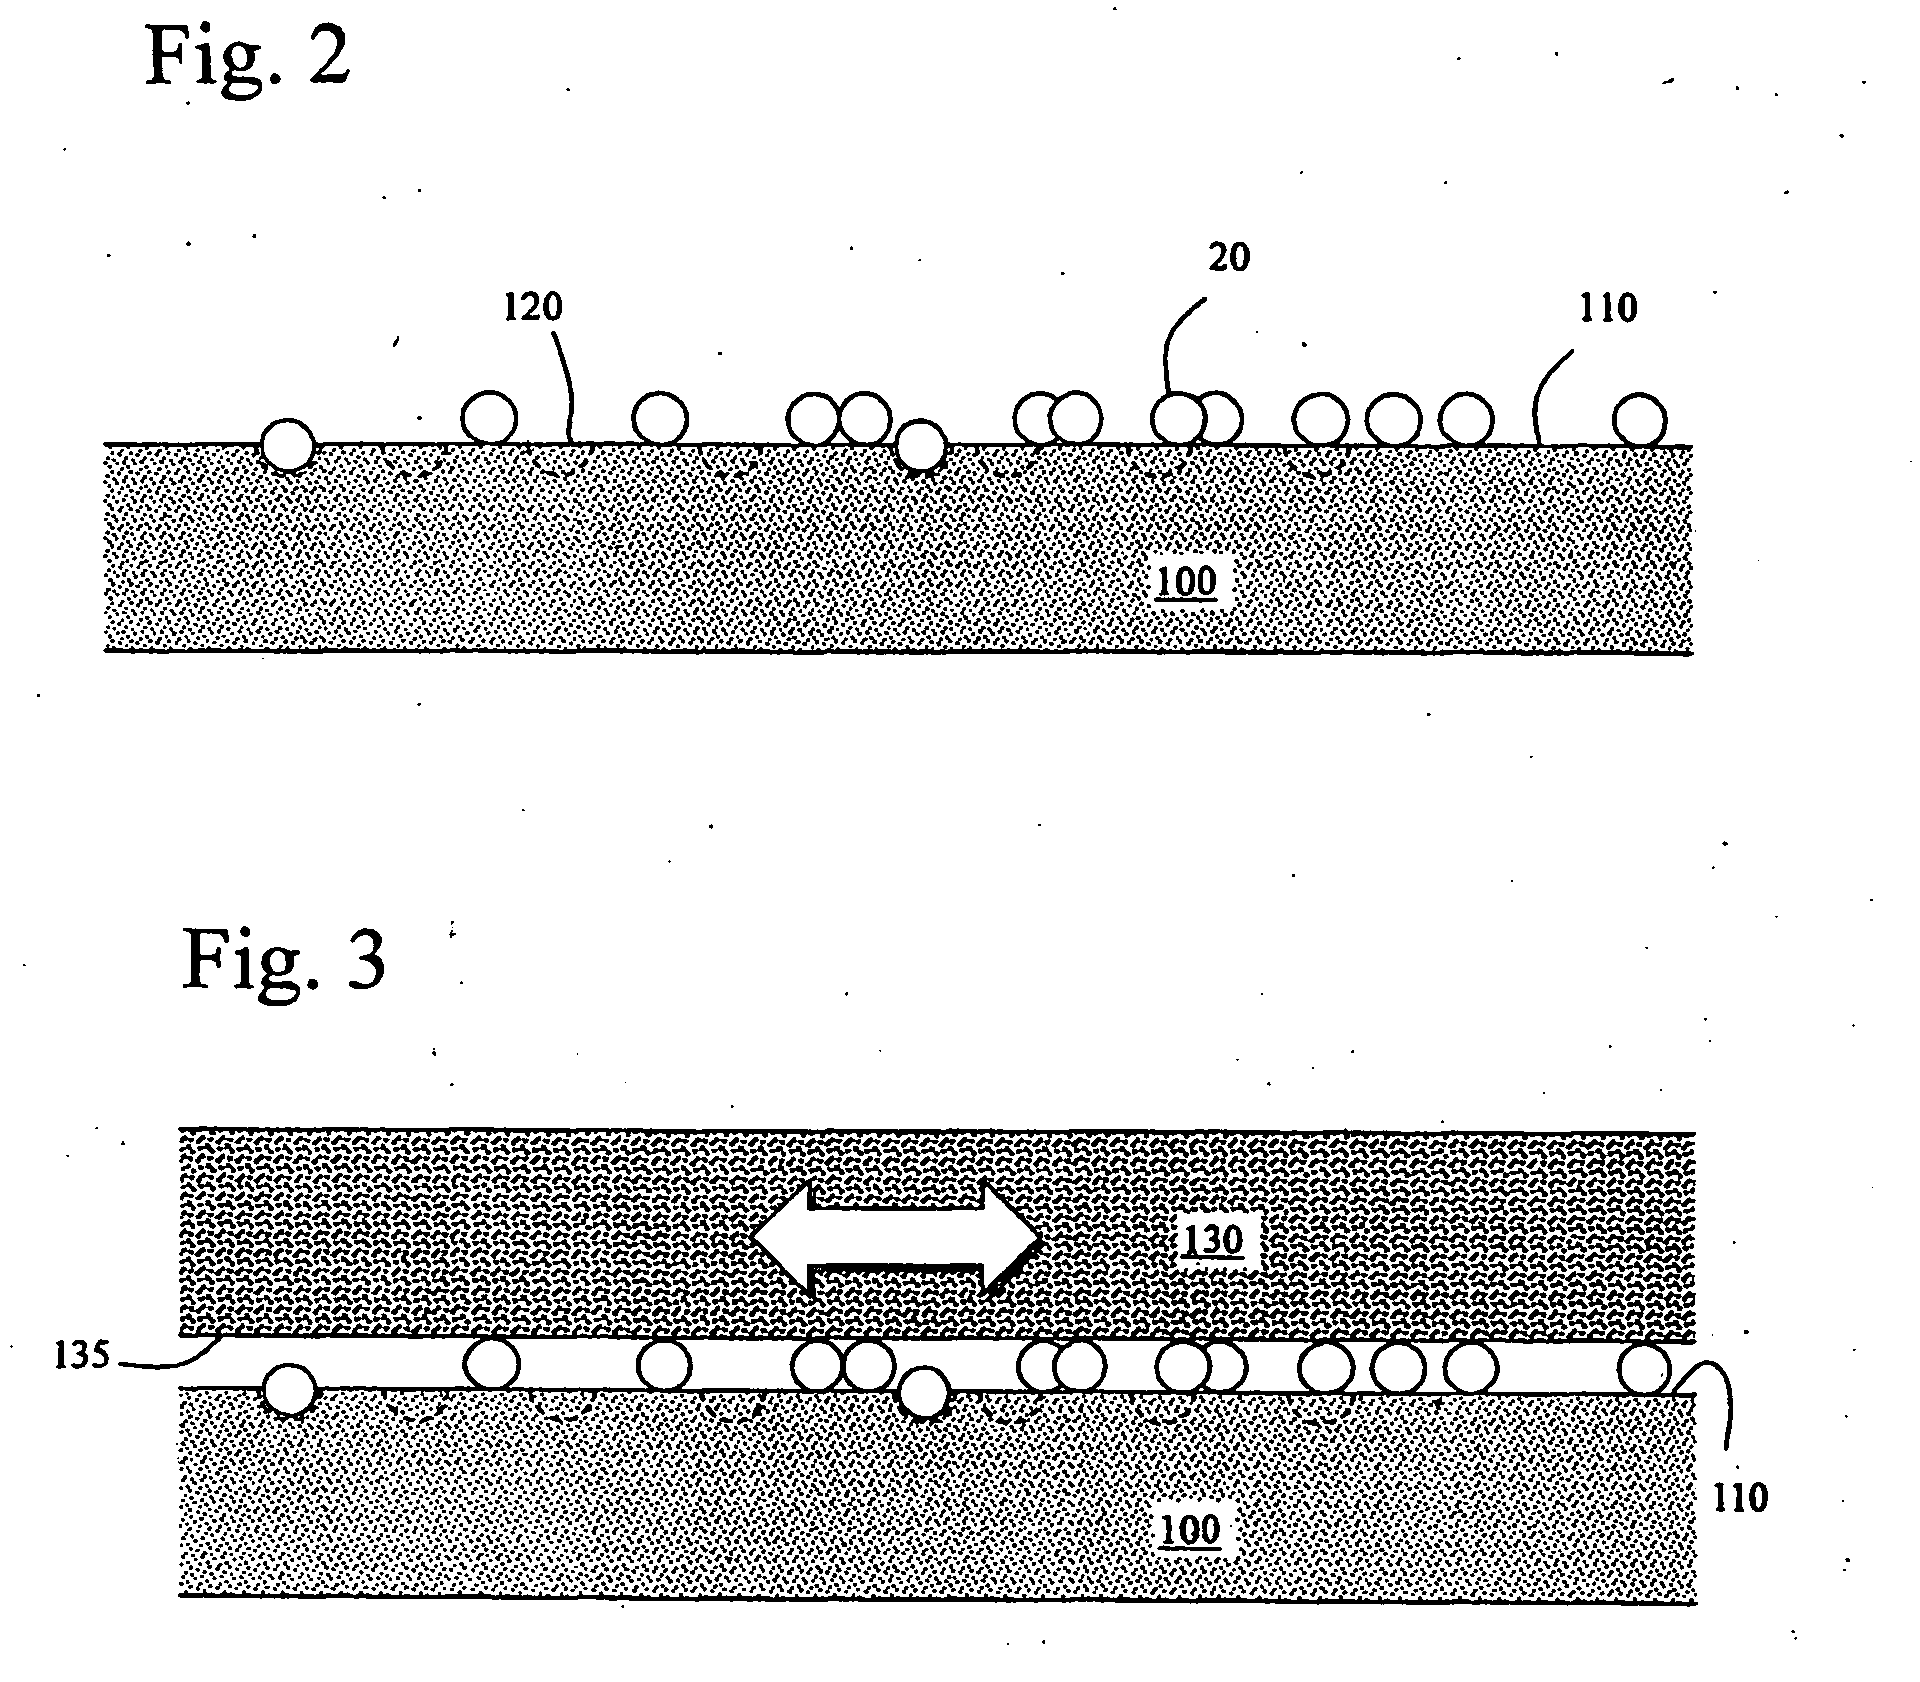 Surface modification of triblock copolymer elastomers